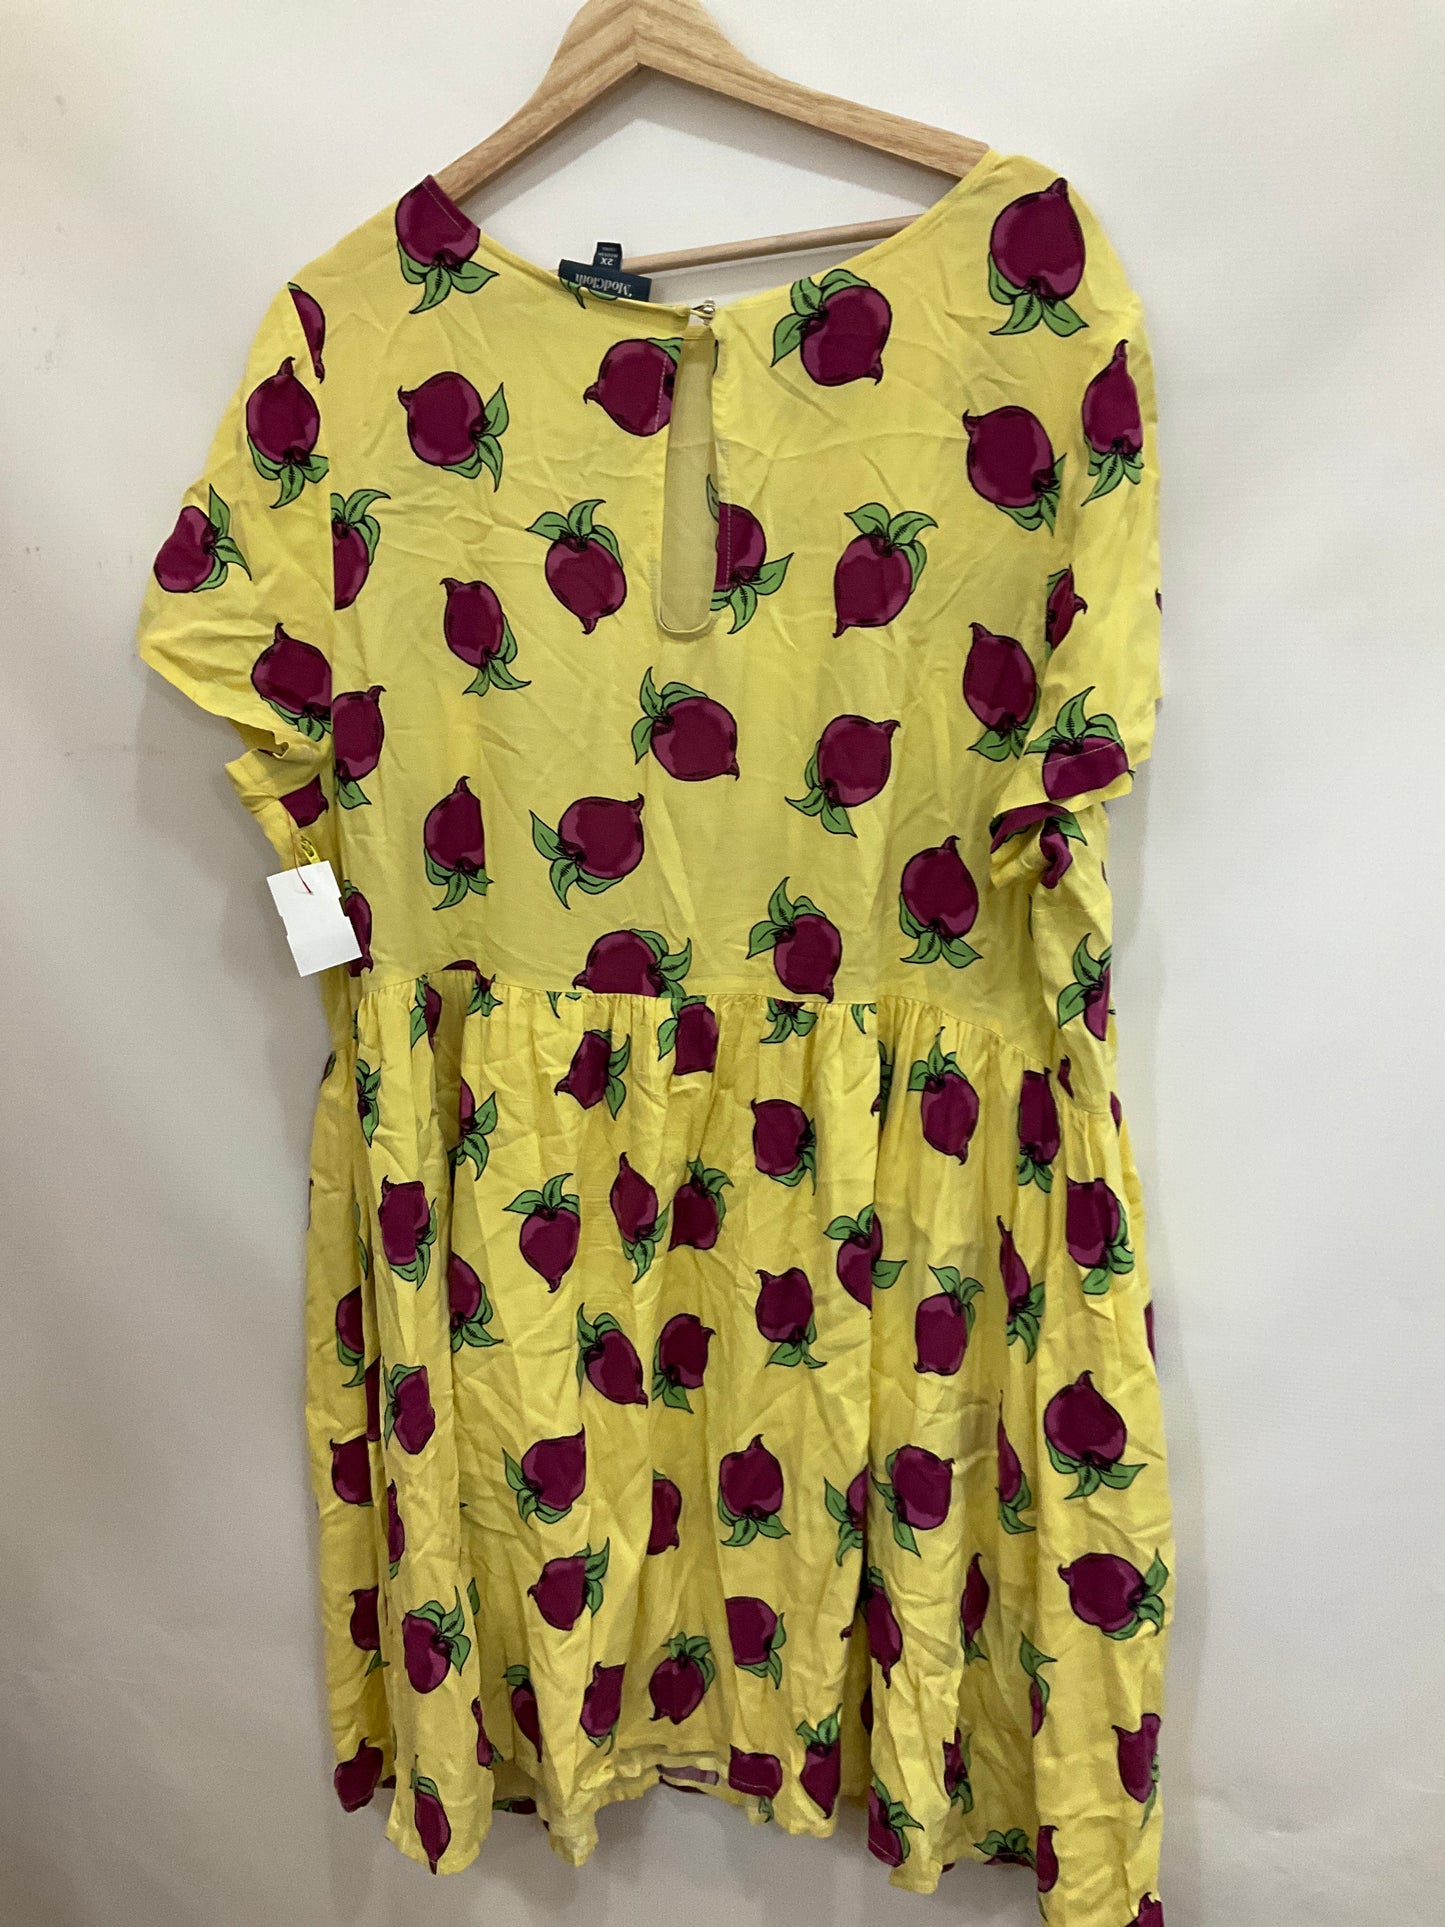 Dress Casual Short By Modcloth  Size: 2x